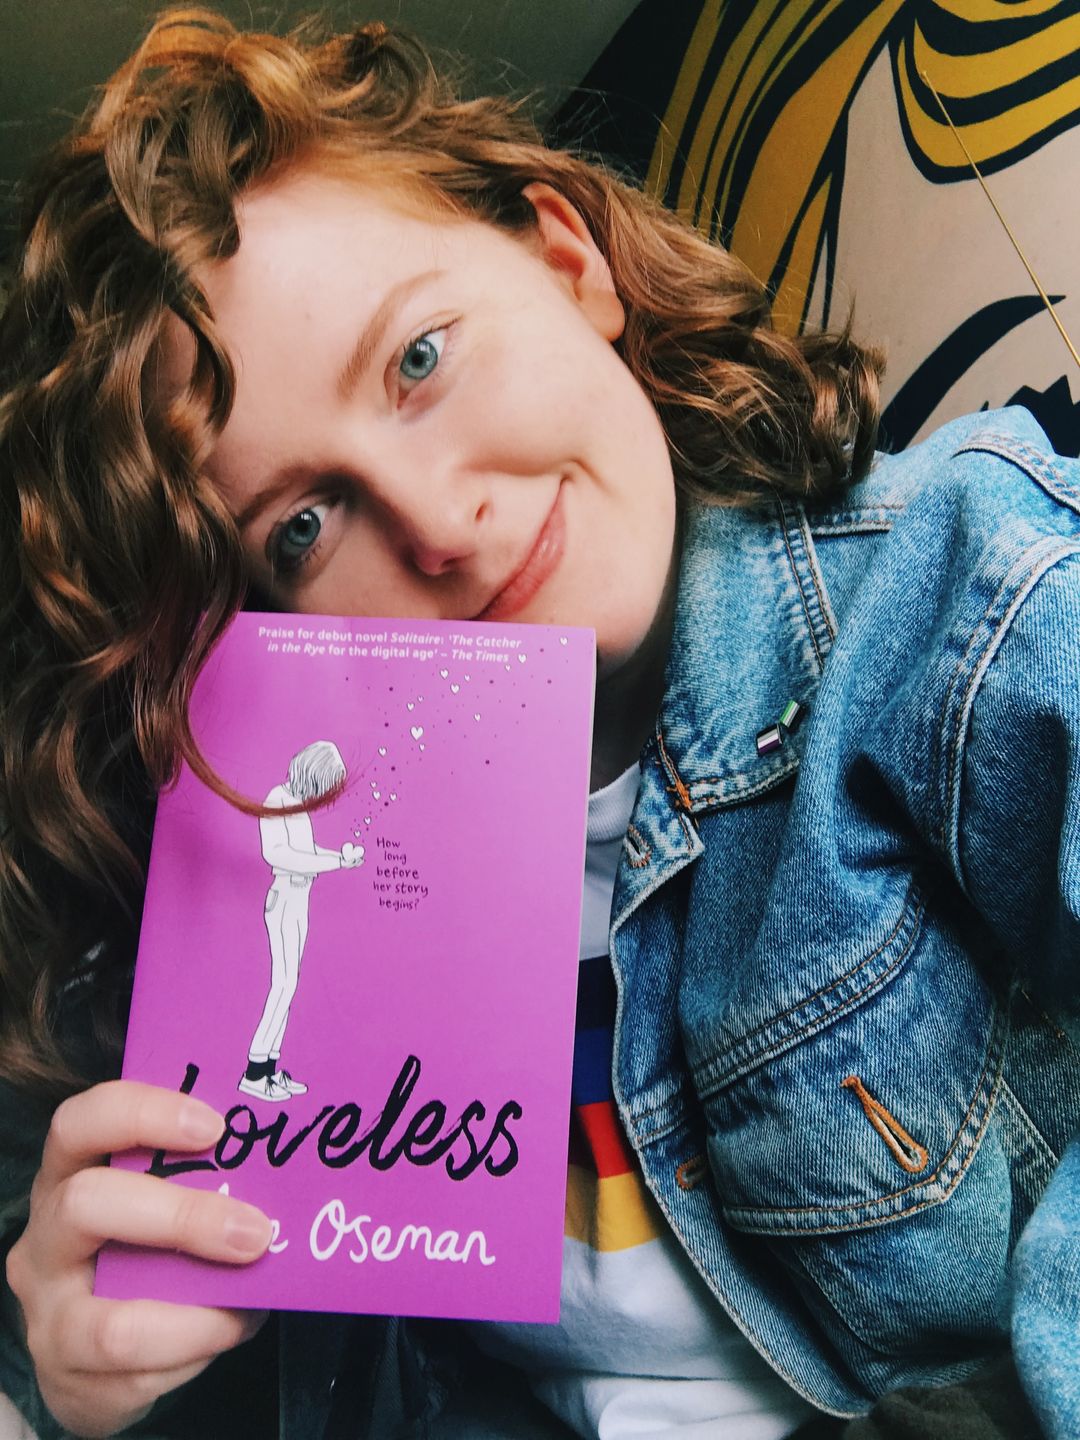 Alice smiling for a selfie, holding up her new book (which is purple) against her cheek